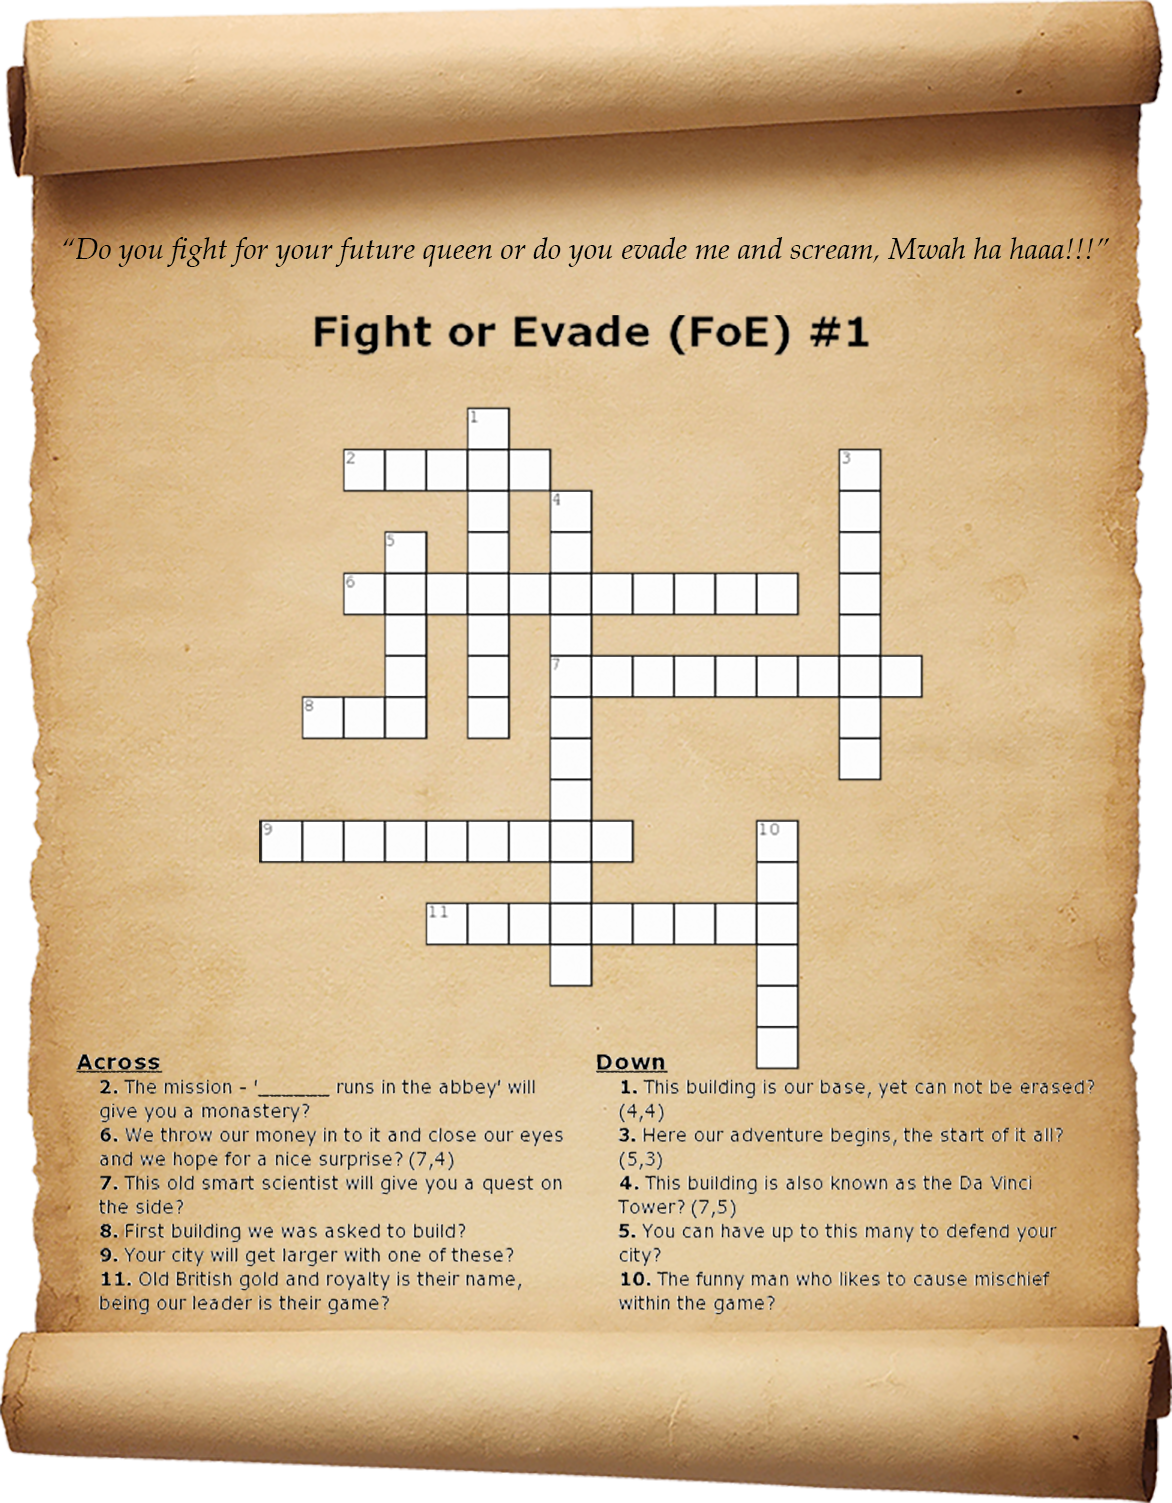 Closed - Fight or Evade - FoE Crossword #1 | Forge of Empires Forum